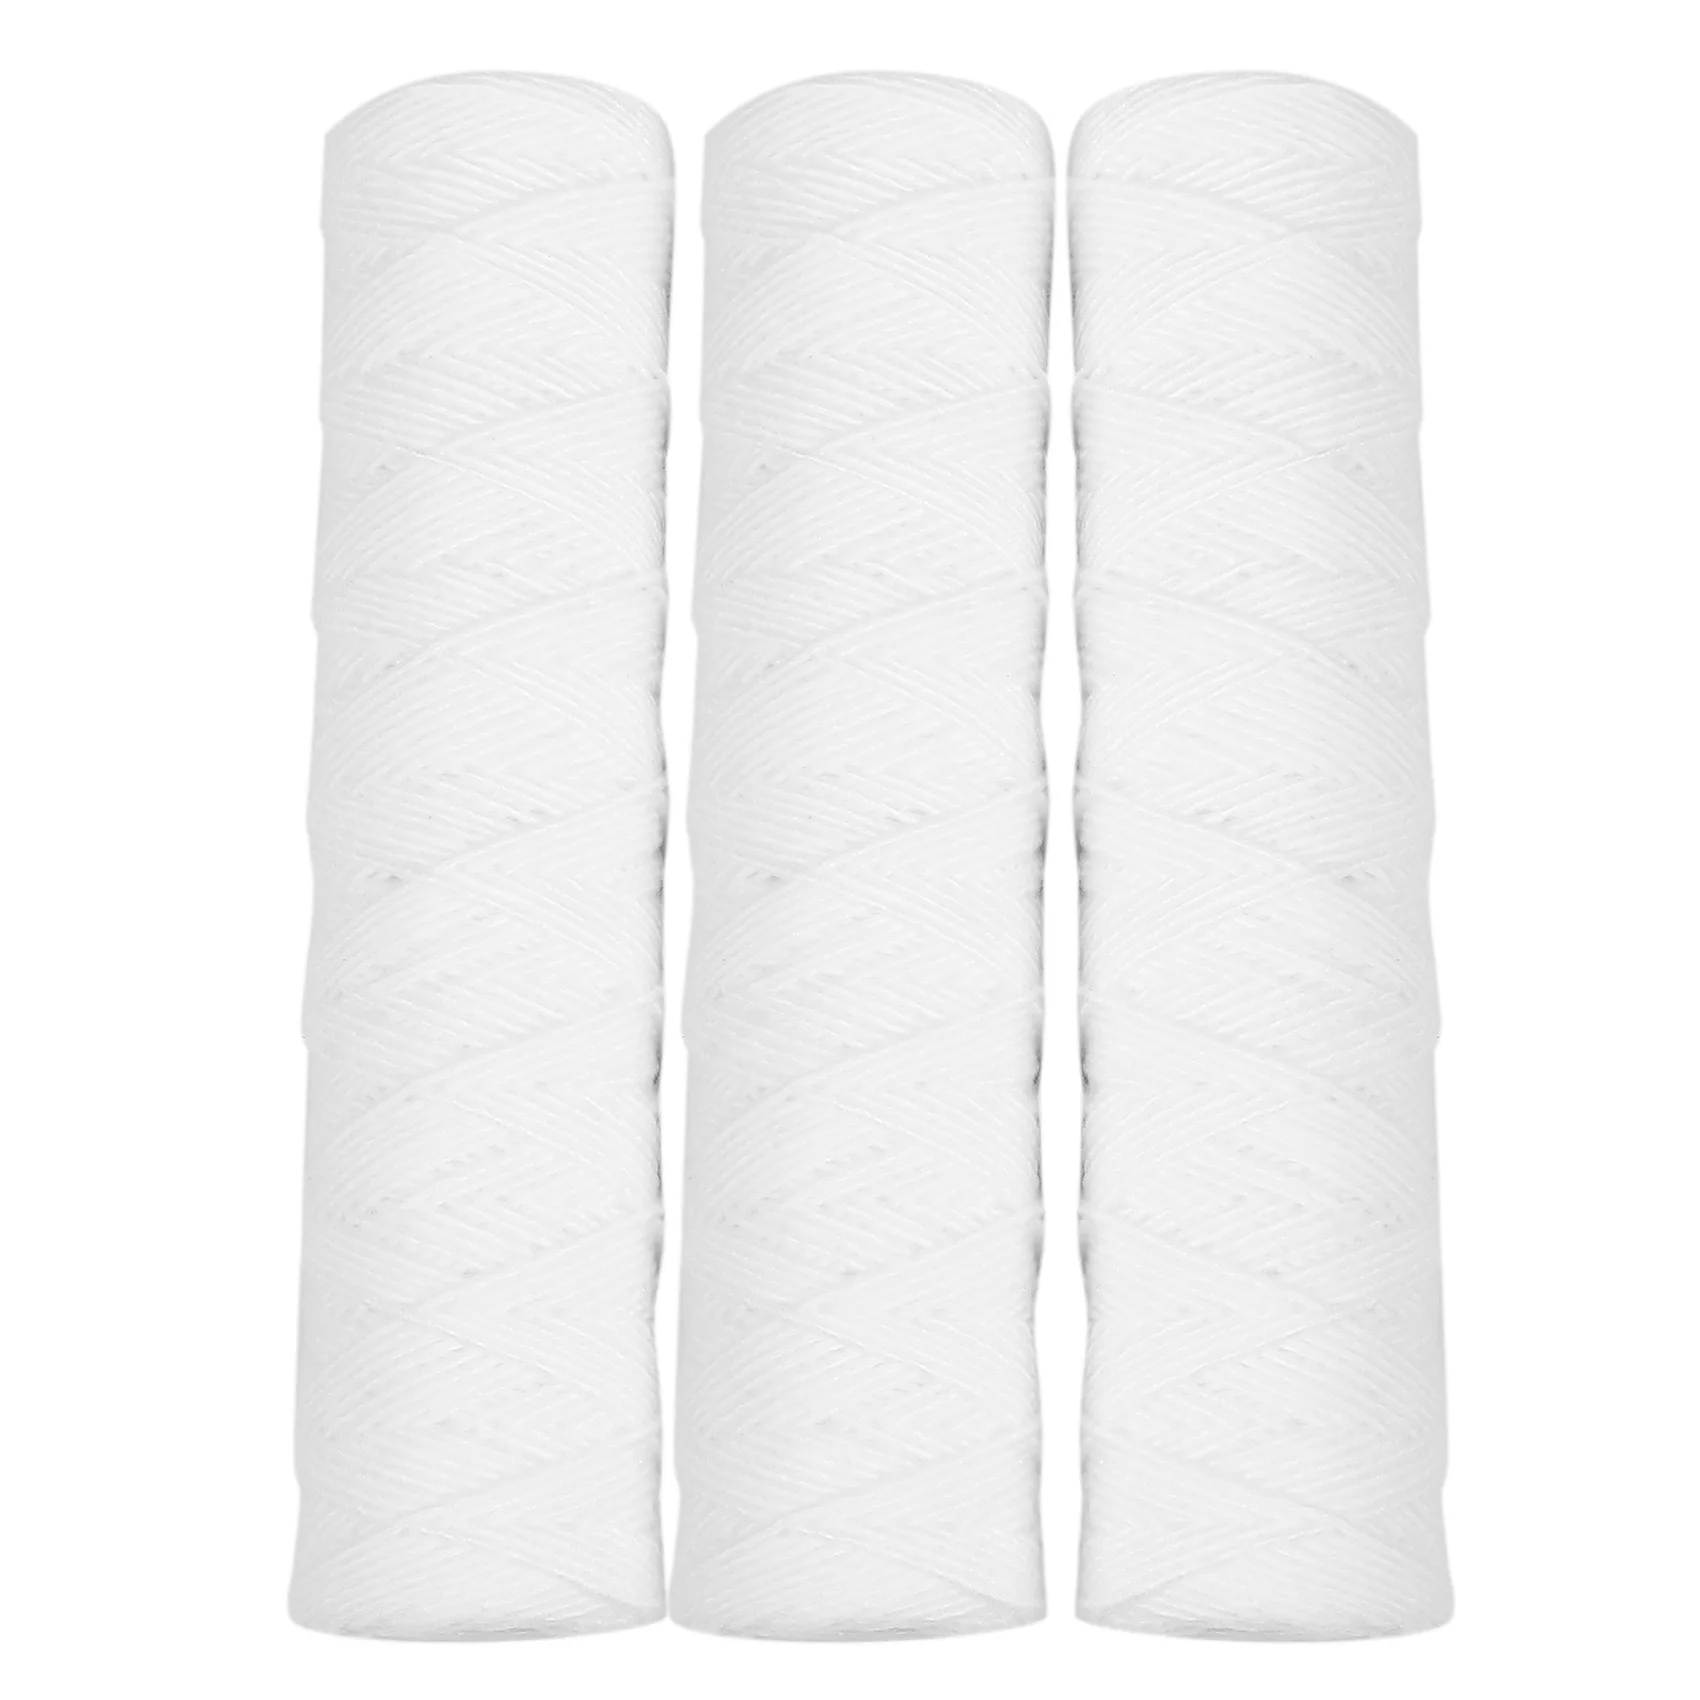 

3Pcs Water Purifier 10 Inch String Wound Filter Cartridge 5 Micrometre PP Cotton Filter Sedmient Filter